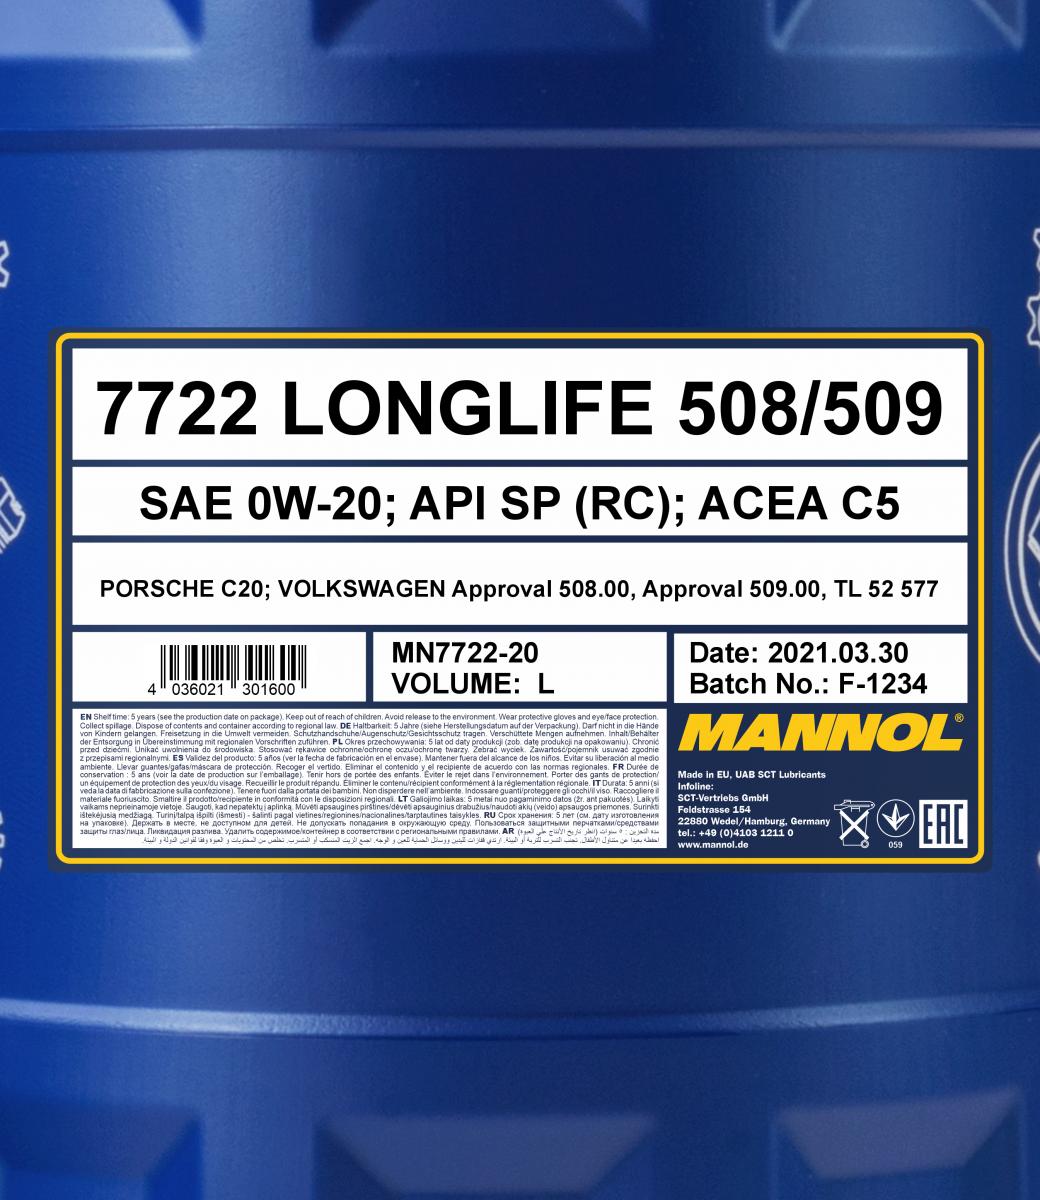 MANNOL - 𝗠𝗔𝗡𝗡𝗢𝗟 𝗟𝗢𝗡𝗚𝗟𝗜𝗙𝗘 𝟱𝟬𝟴/𝟱𝟬𝟵 𝟳𝟳𝟮𝟮 is approved  under VW Standard 508.00 and VW Standard 509.00 by Volkswagen.